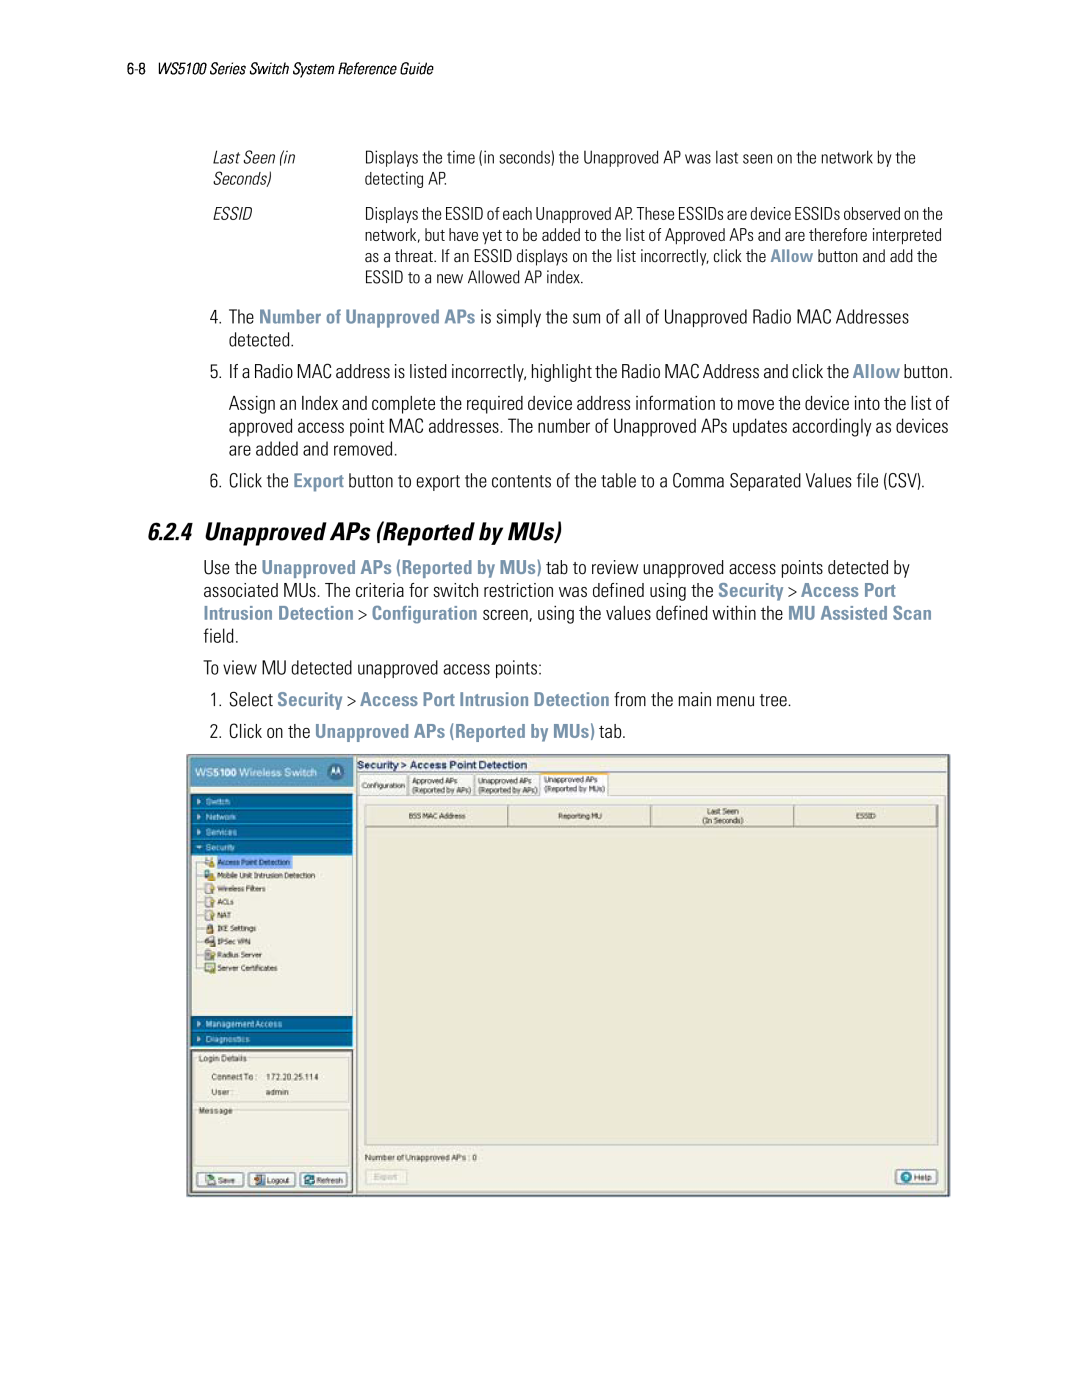 Motorola WS5100 manual 6.2.4Unapproved APs Reported by MUs, Click on the Unapproved APs Reported by MUs tab 